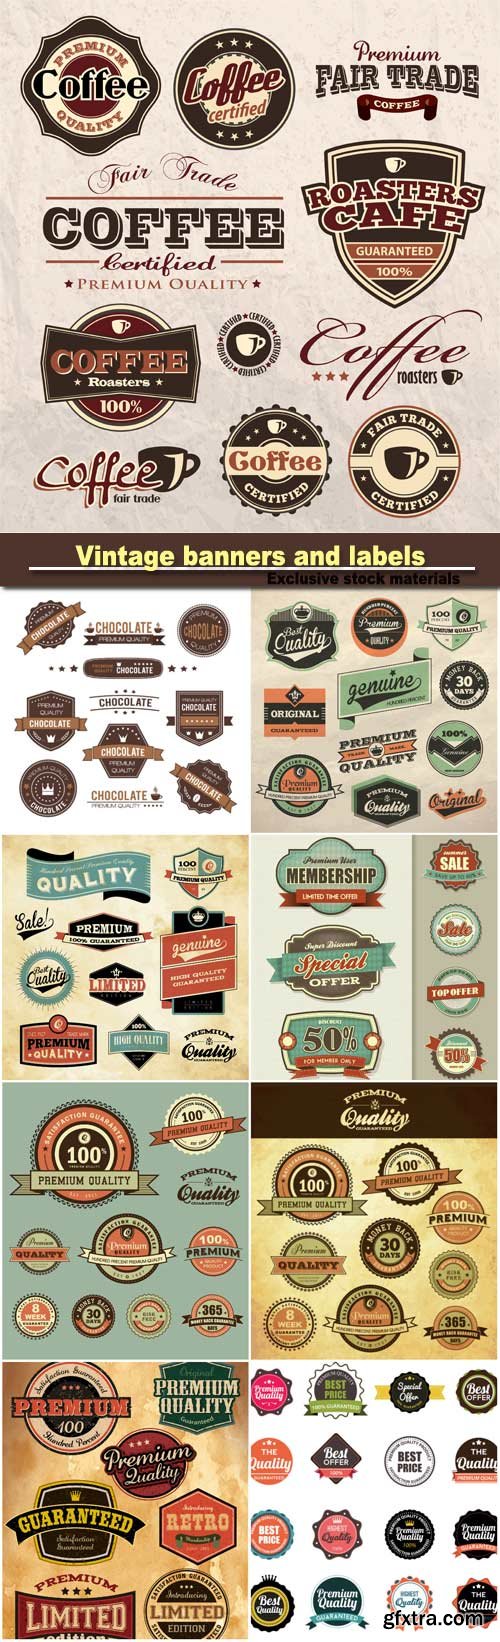 Vintage banners and labels